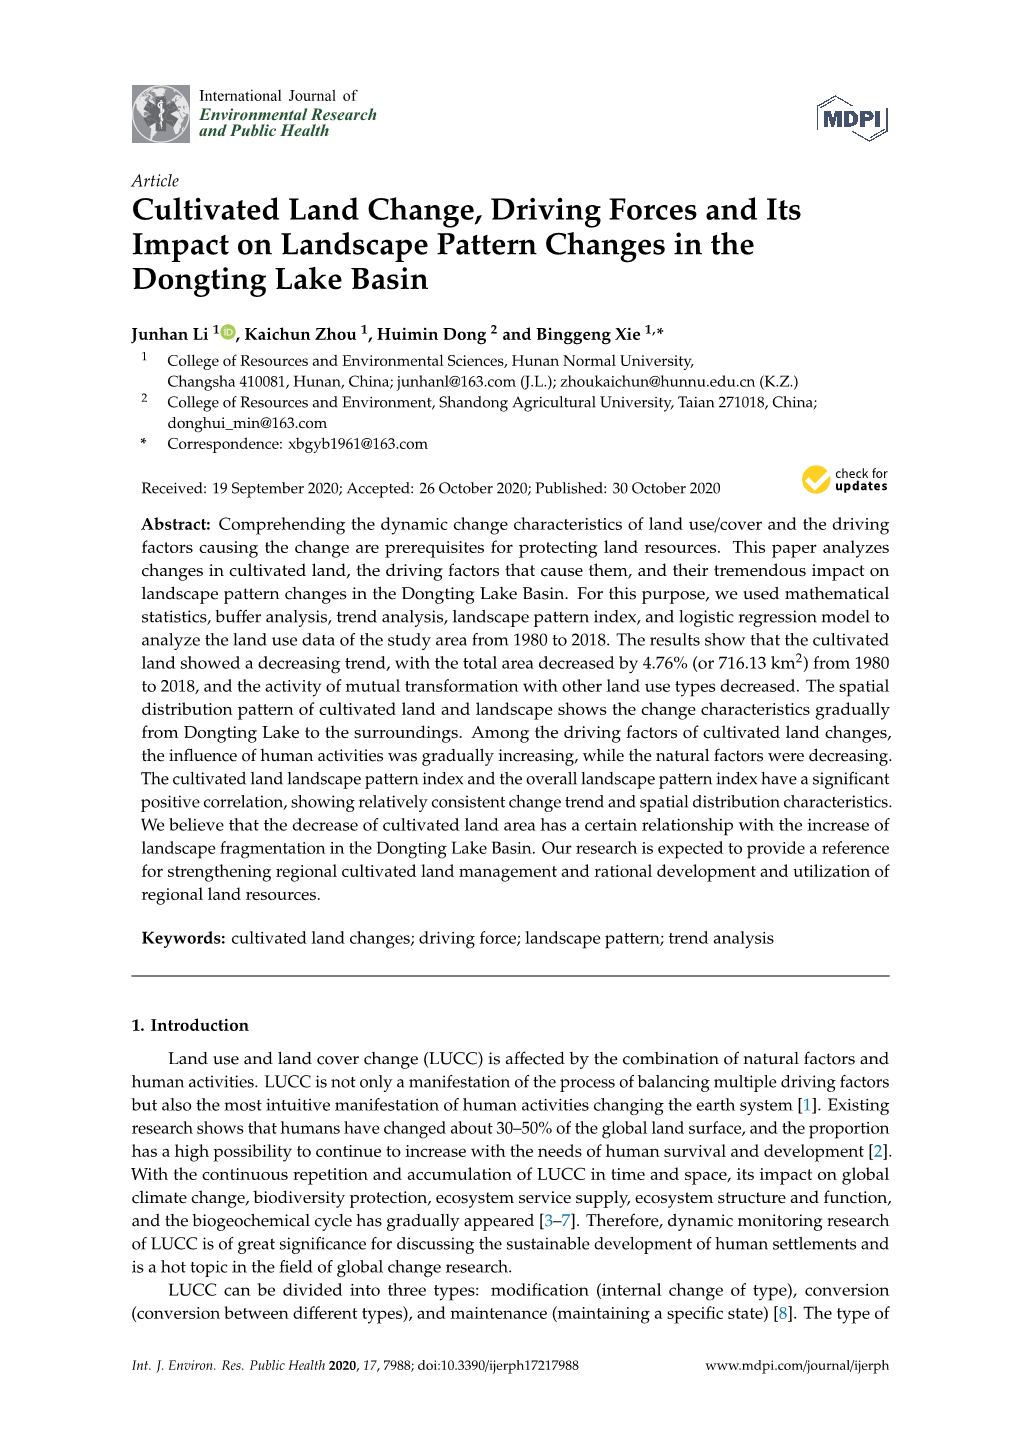 Cultivated Land Change, Driving Forces and Its Impact on Landscape Pattern Changes in the Dongting Lake Basin